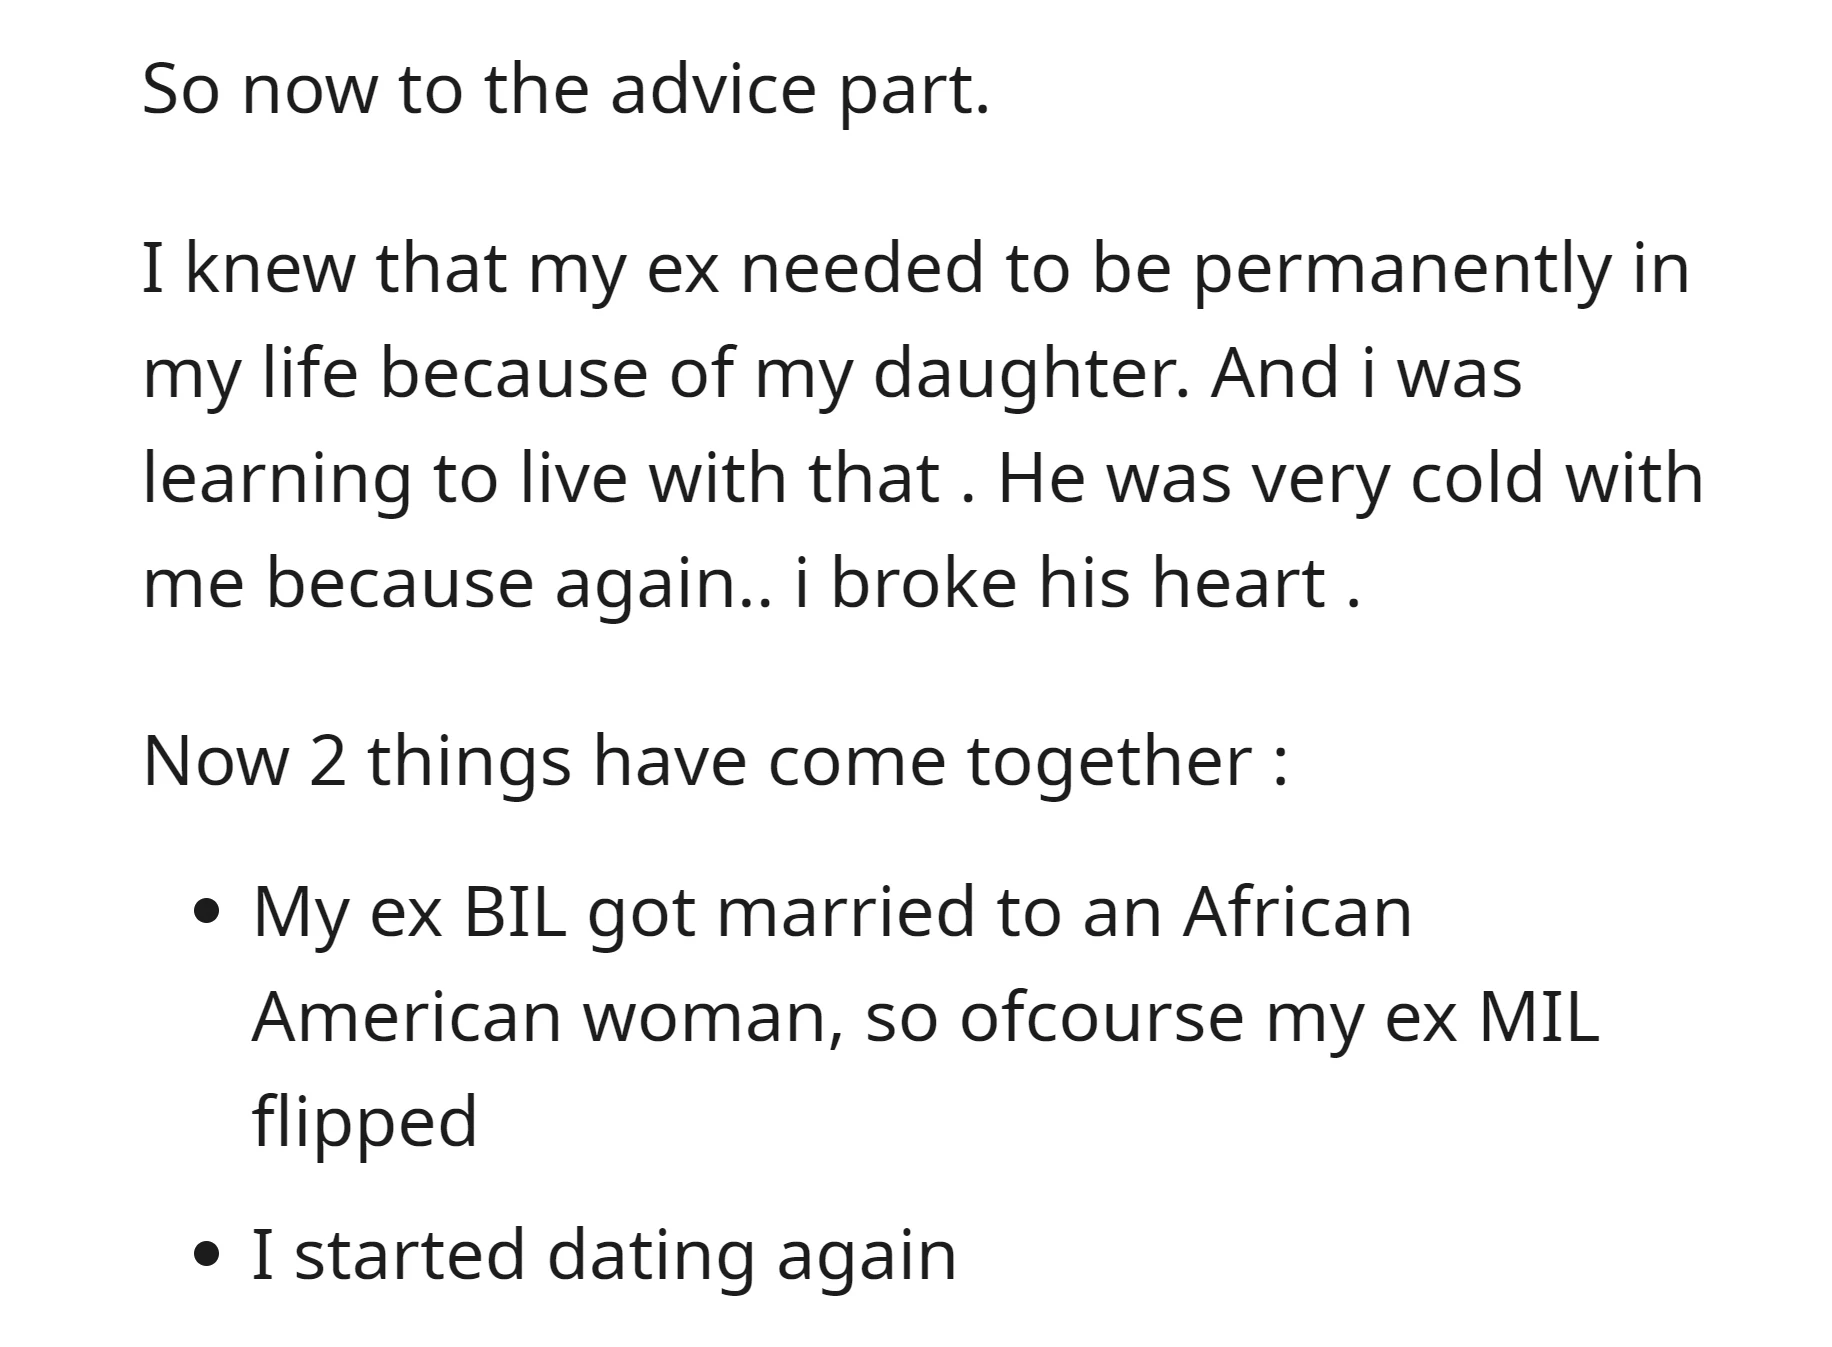 OP started dating again